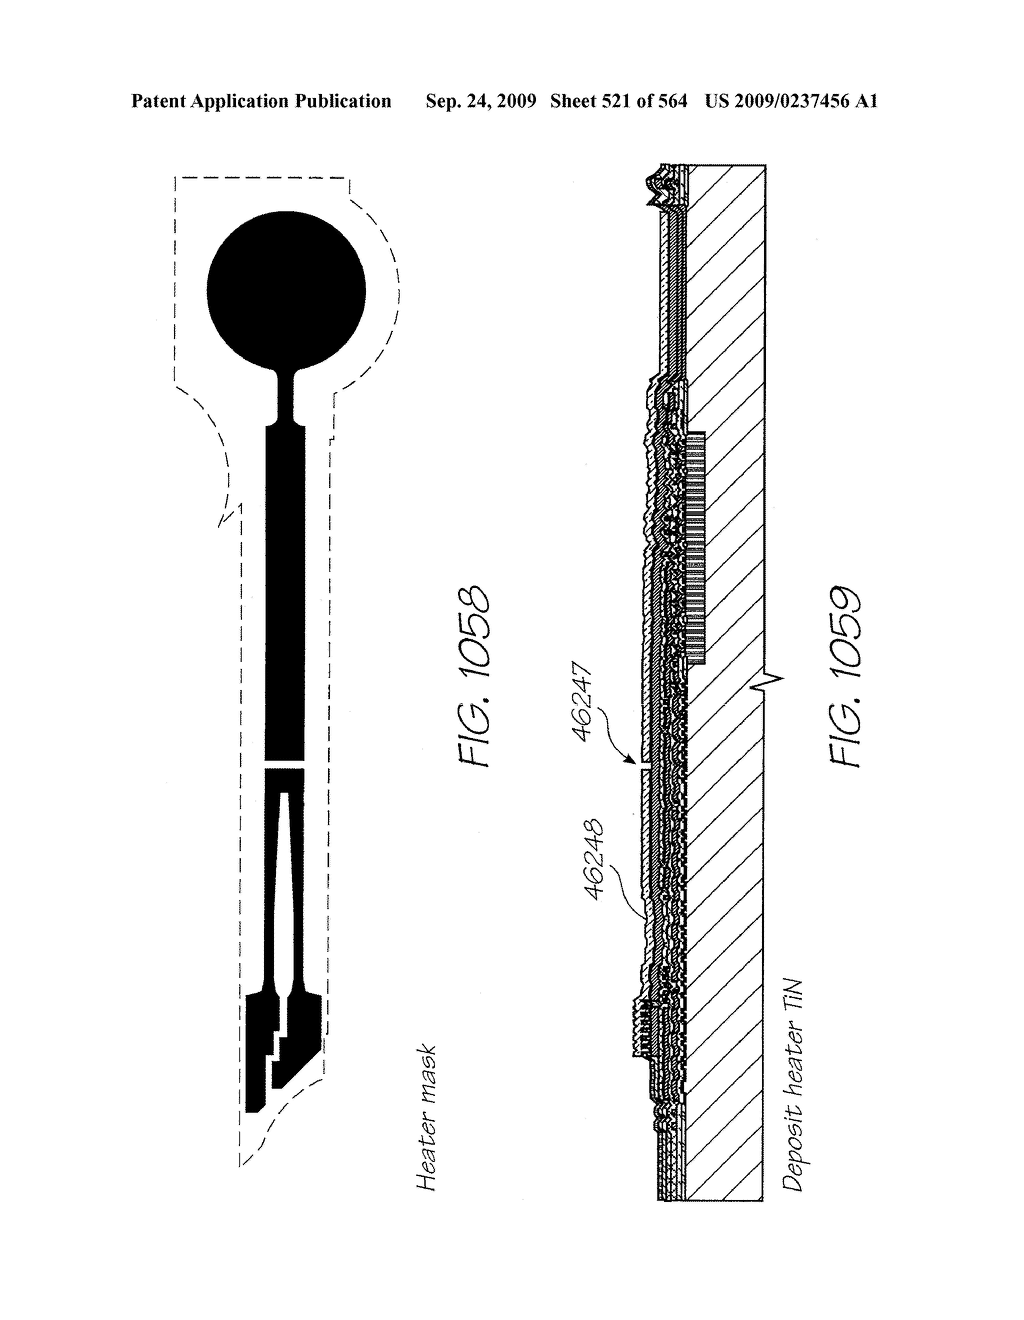 Inkjet Printhead With Paddle For Ejecting Ink From One Of Two Nozzles - diagram, schematic, and image 522